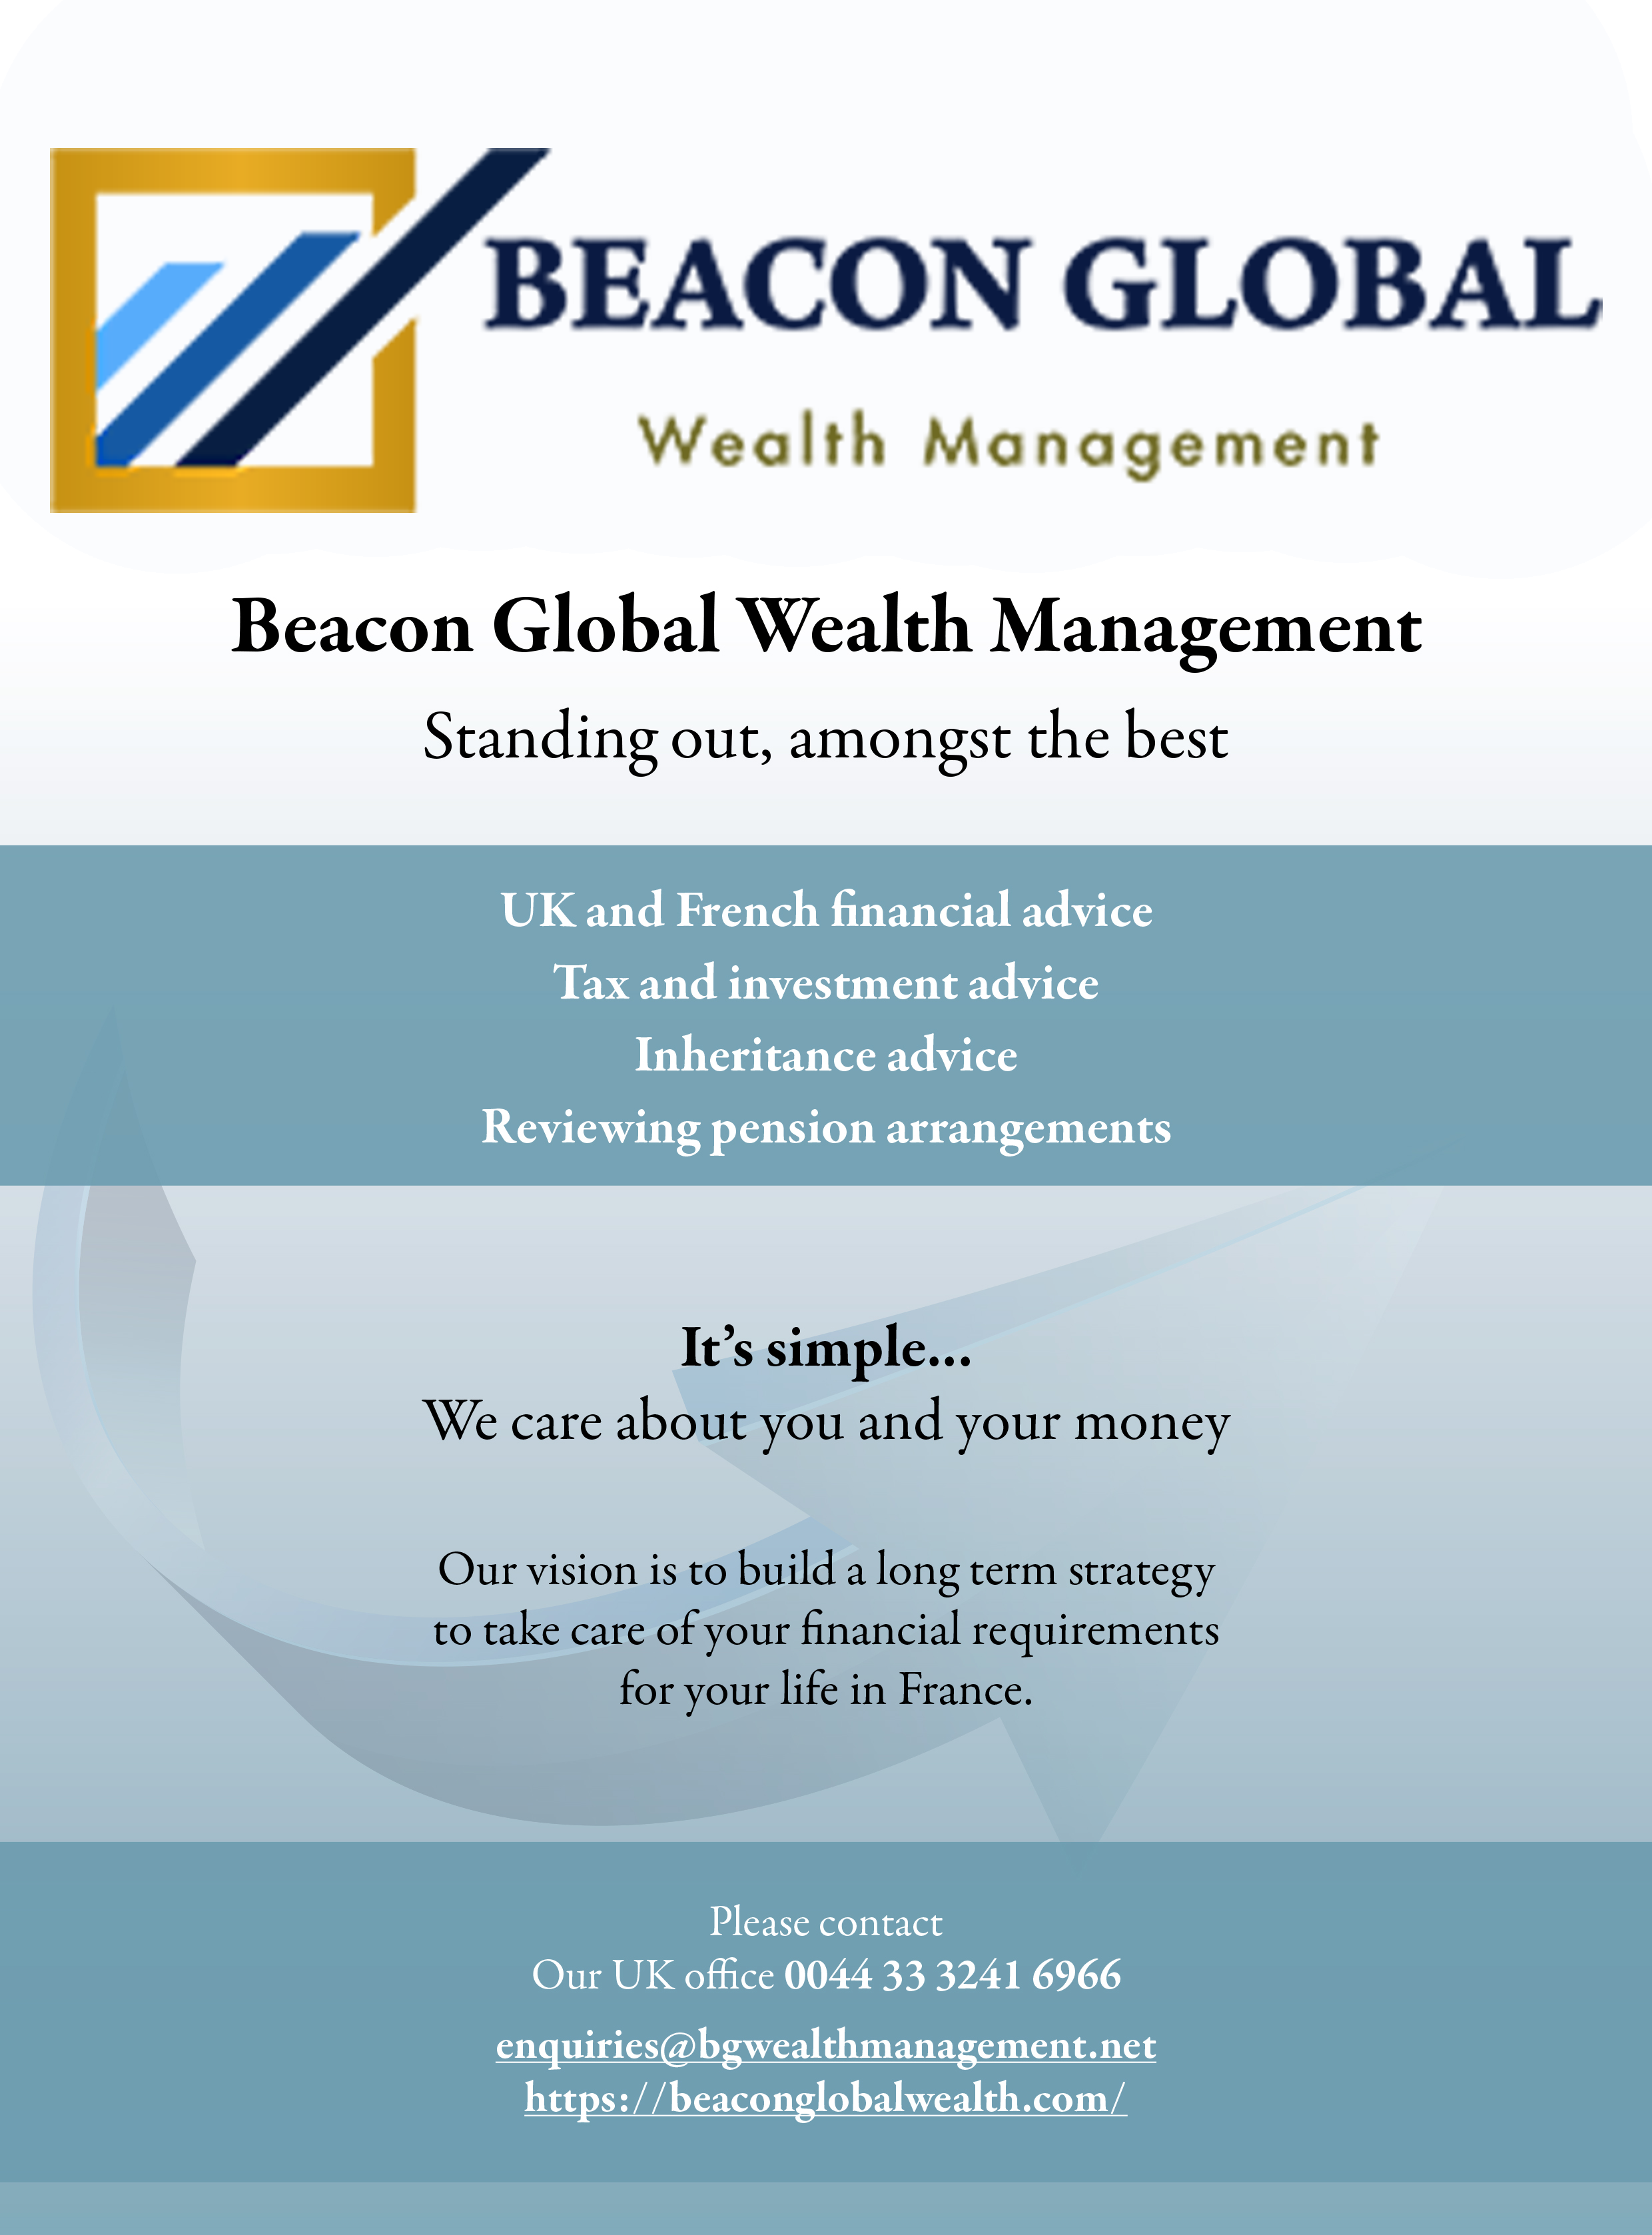 BEACON GLOBAL WEALTH MANAGEMENT